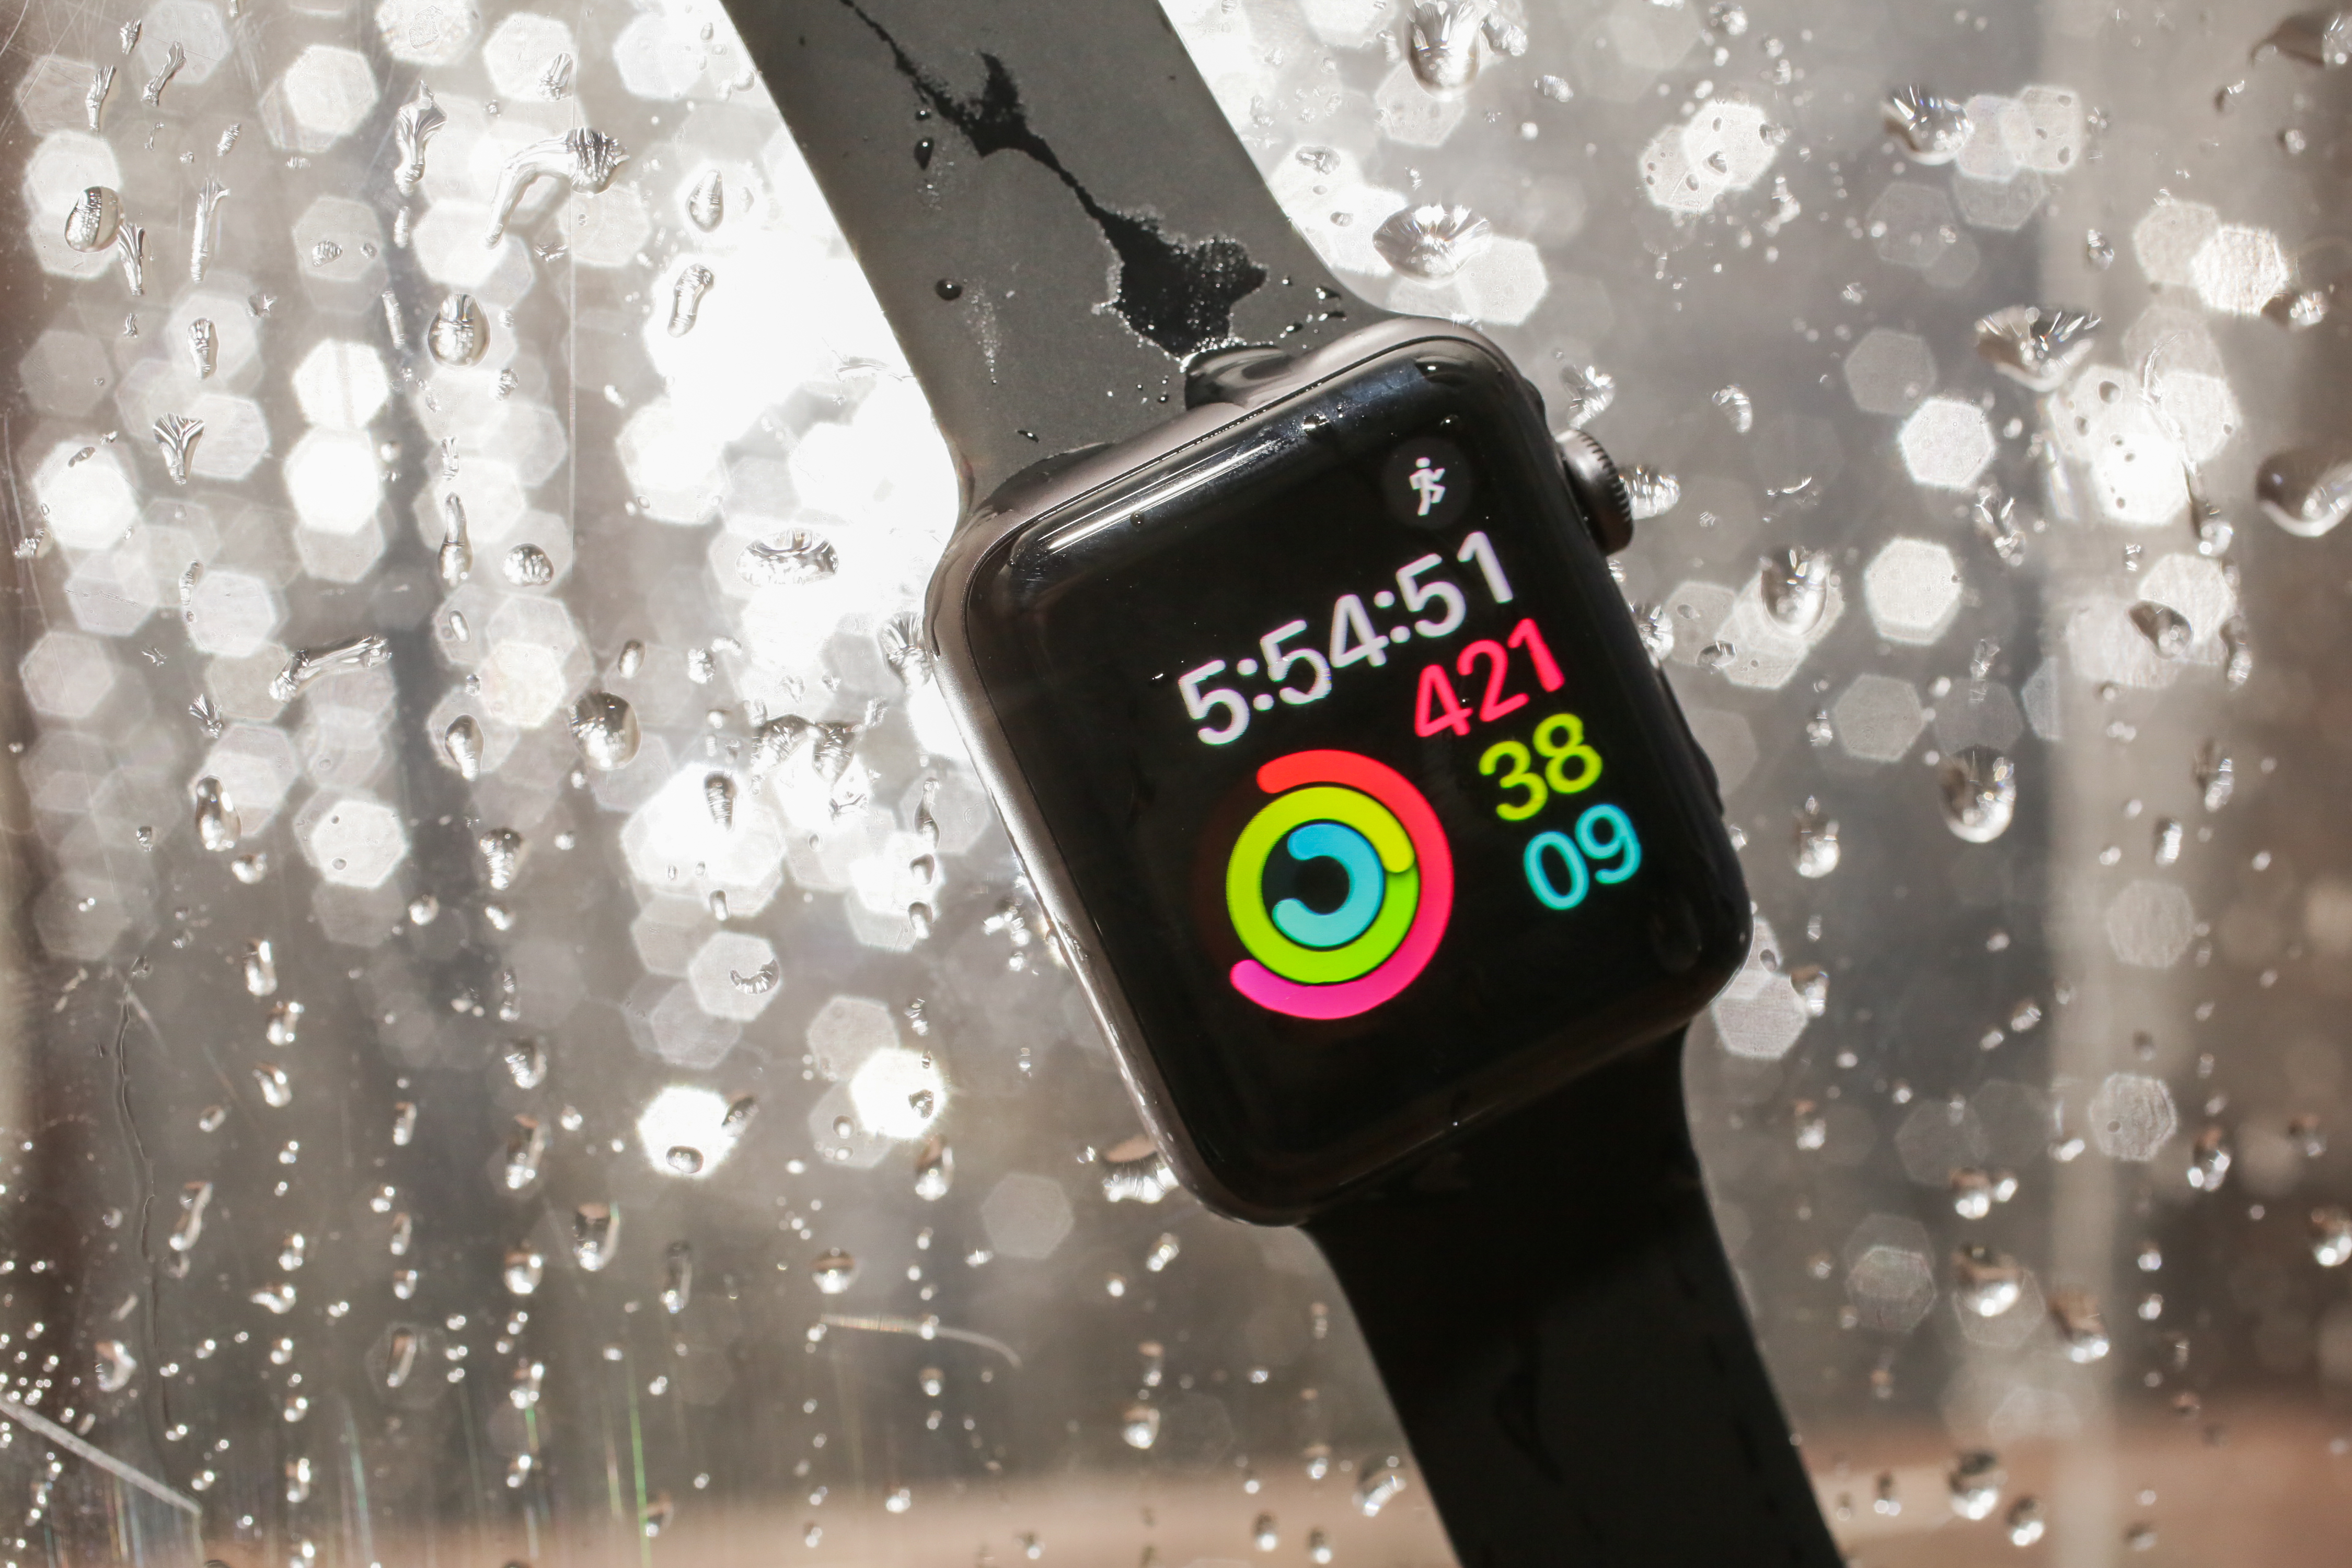 Apple Watch Series 2 review: this time, a better smartwatch - CNET